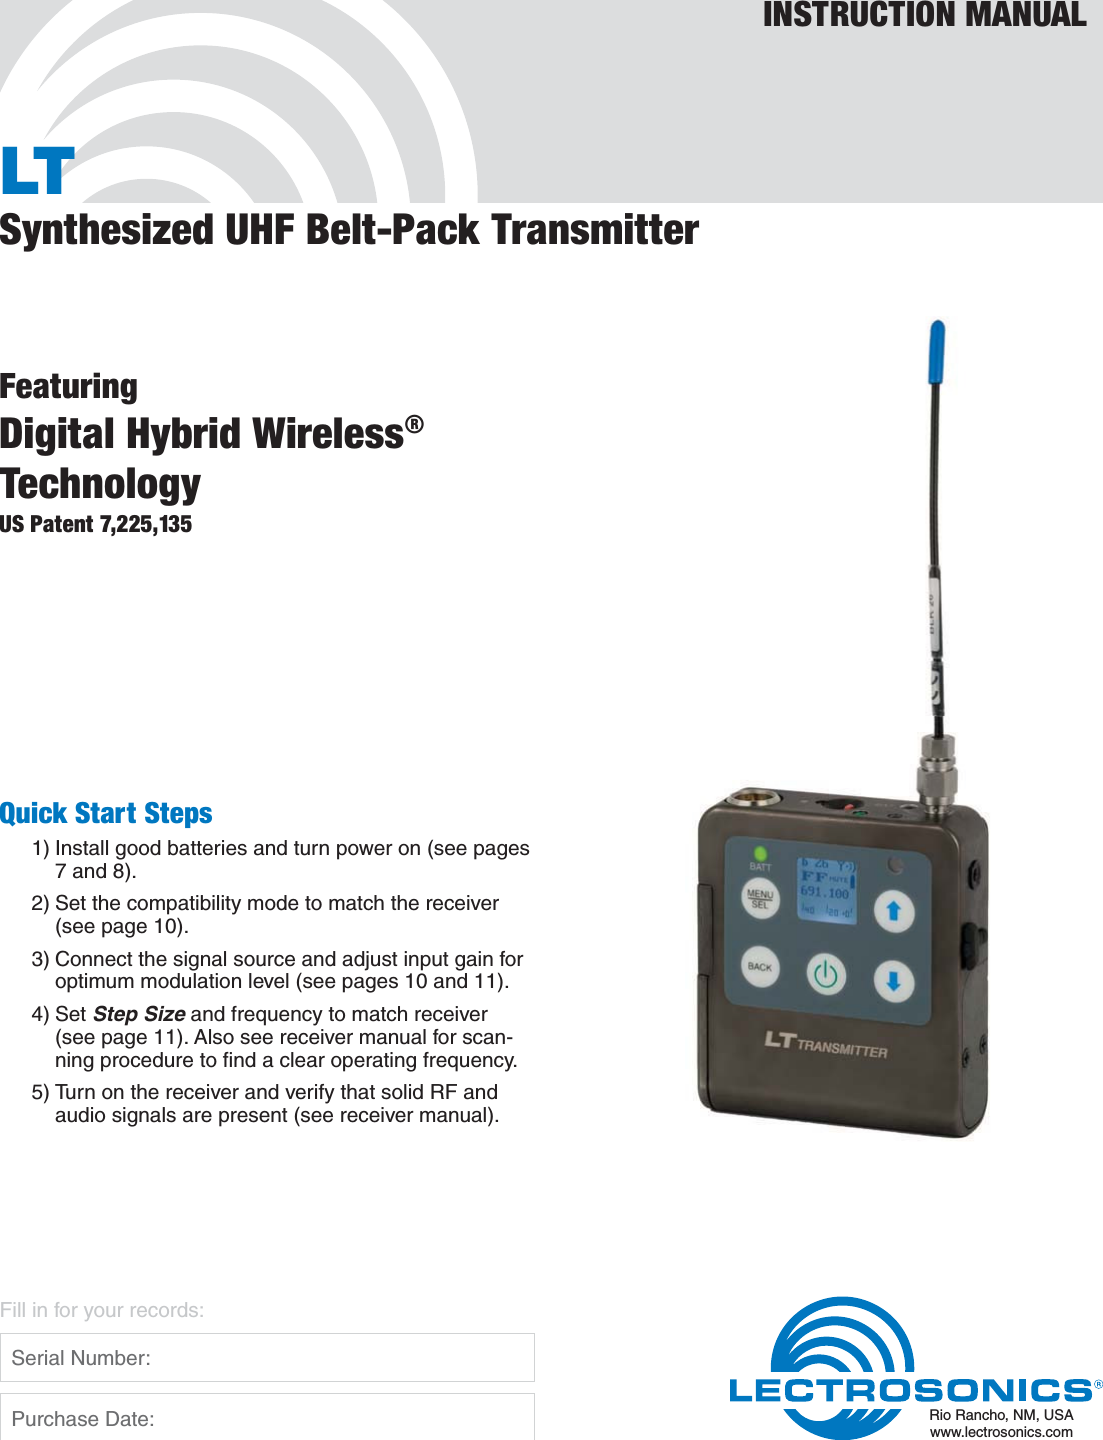 LTSynthesized UHF Belt-Pack TransmitterFeaturingDigital Hybrid Wireless®TechnologyUS Patent 7,225,135INSTRUCTION MANUALRio Rancho, NM, USAwww.lectrosonics.comFill in for your records:  Serial Number:  Purchase Date:Quick Start Steps1) Install good batteries and turn power on (see pages 7 and 8).2) Set the compatibility mode to match the receiver (see page 10).3) Connect the signal source and adjust input gain for optimum modulation level (see pages 10 and 11).4) Set Step Size and frequency to match receiver (see page 11). Also see receiver manual for scan-ning procedure to ﬁnd a clear operating frequency.5) Turn on the receiver and verify that solid RF and audio signals are present (see receiver manual).